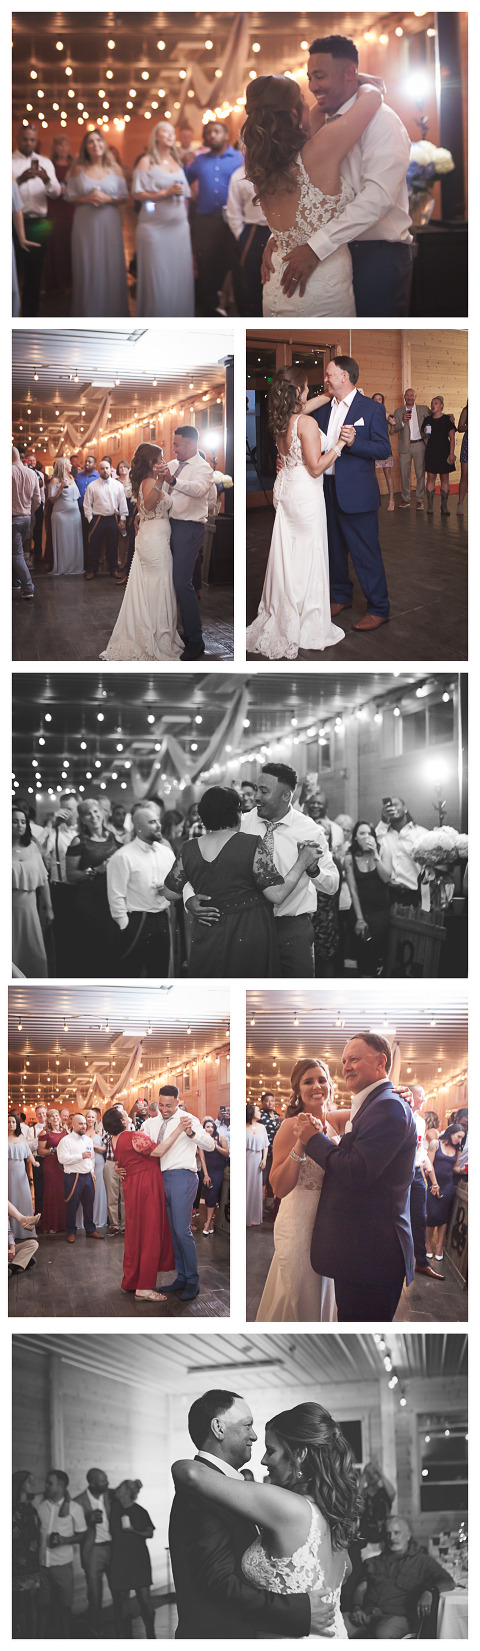 reception dancing, Jerome & Michelle married at McInosh barn in Ellensburg photographed by Hailey Haberman Ellensburg Wedding Photographer